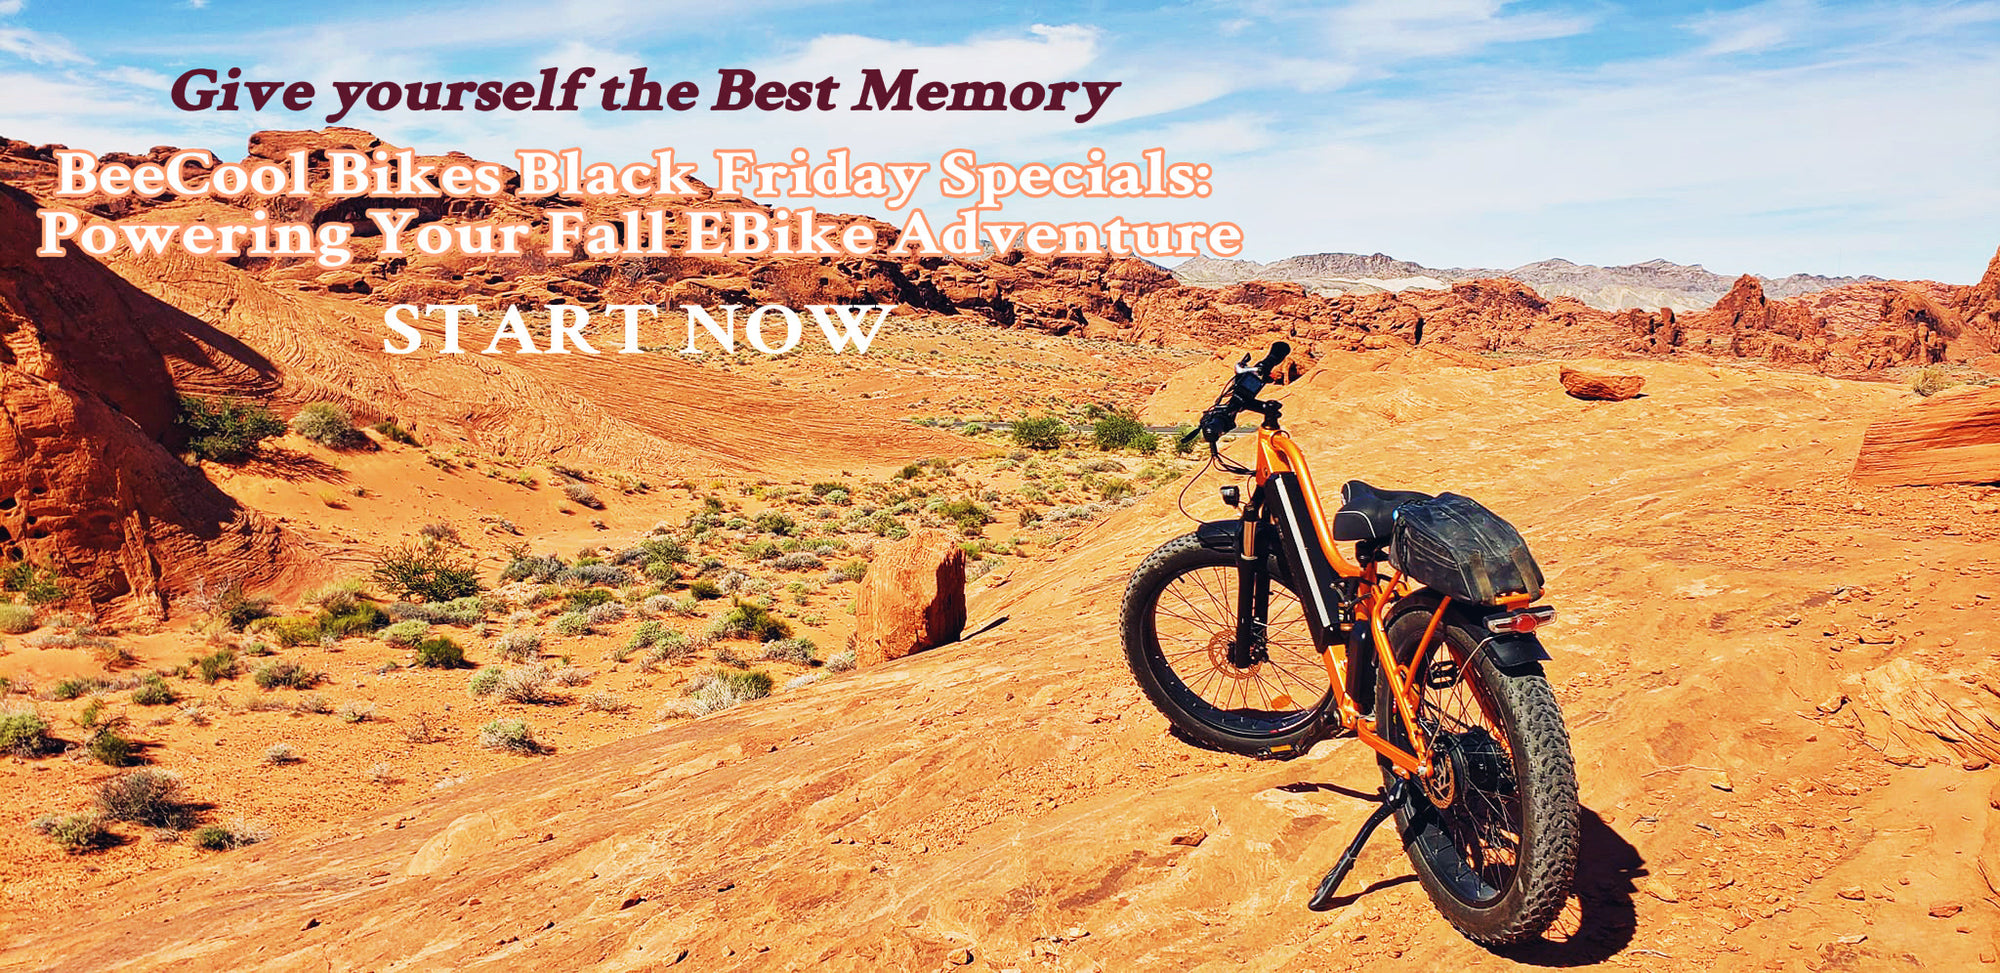 Fall EBike Riding Guide: Five Scenic Destinations You Shouldn't Miss!